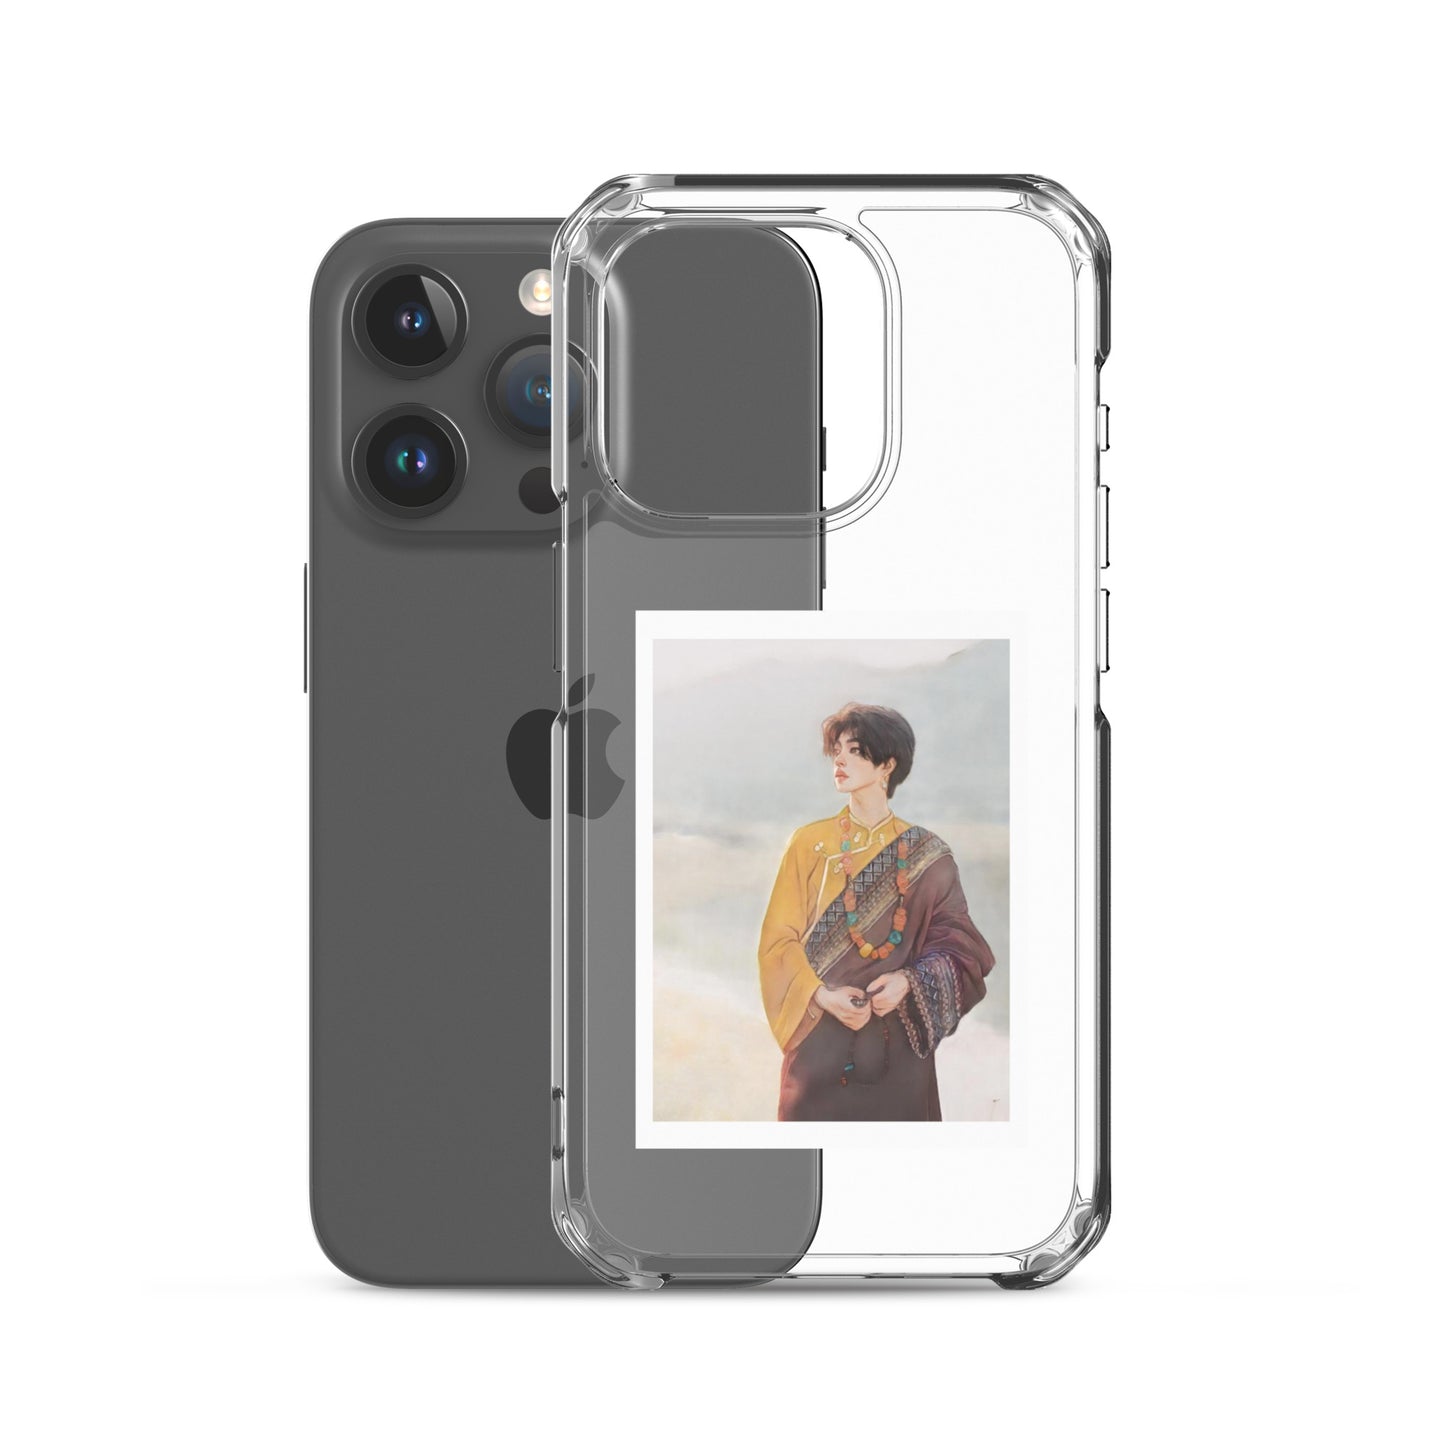 TIBETAN BOY iPhone Case is designed under Dzimig Studios Tibetan Archive Project. This sleek iPhone® case protects your phone from scratches, dust, oil, and dirt.